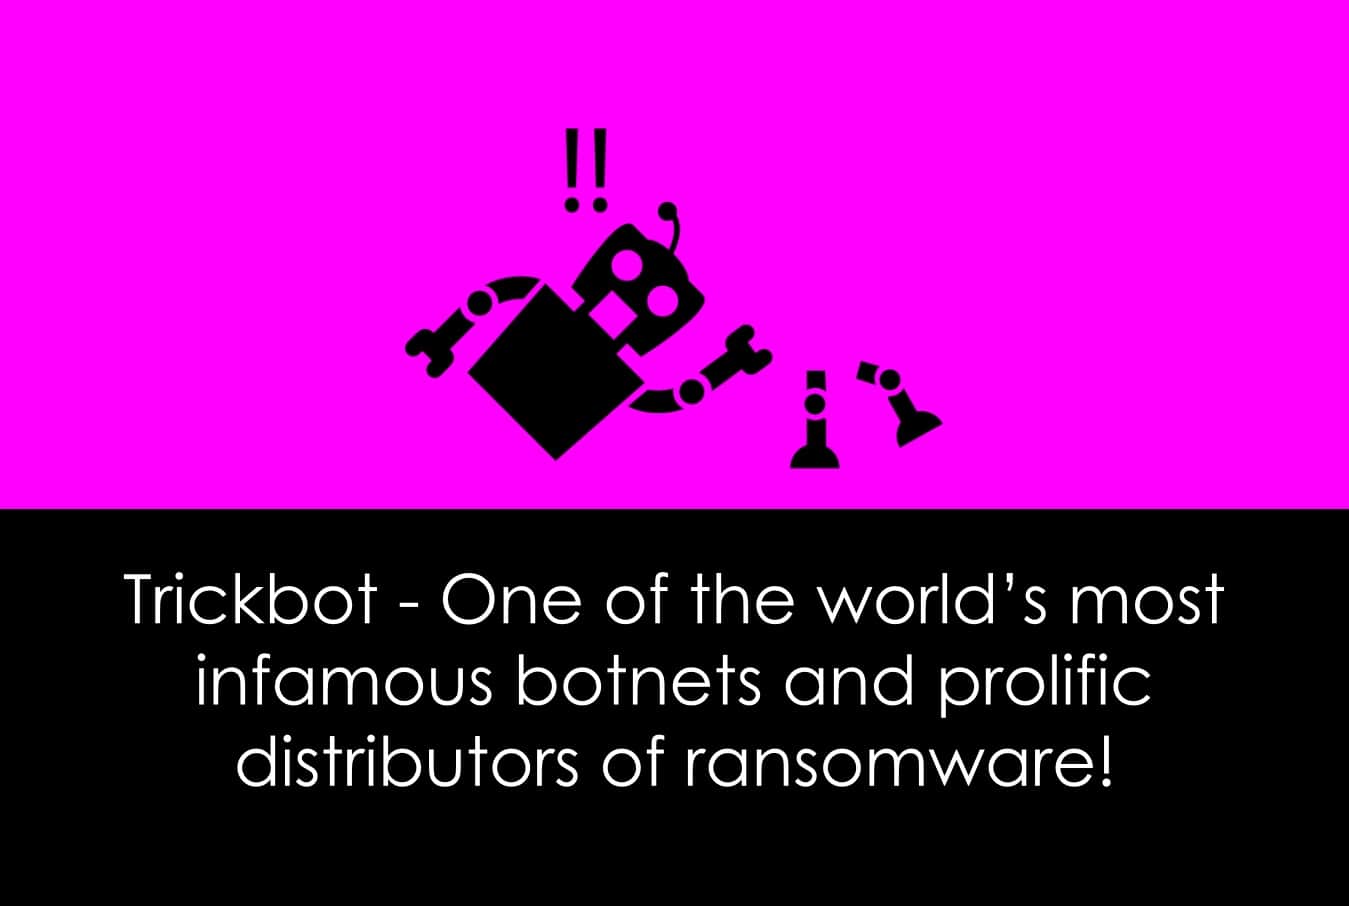 Cyber Security companies dismantle Trickbot ransomware botnet